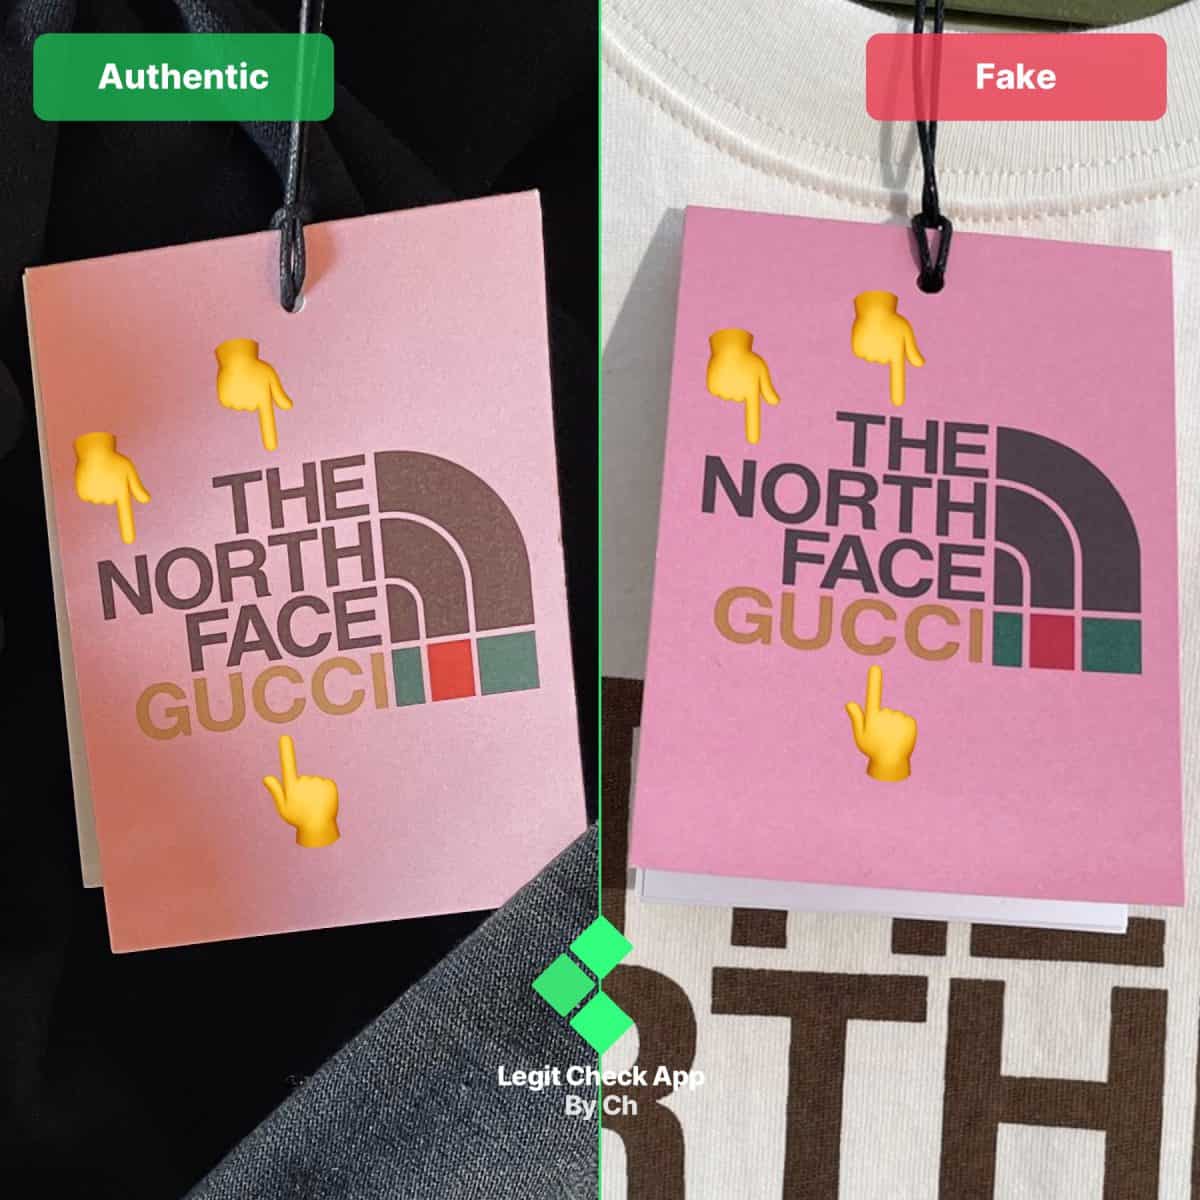 how to spot fake gucci tnf